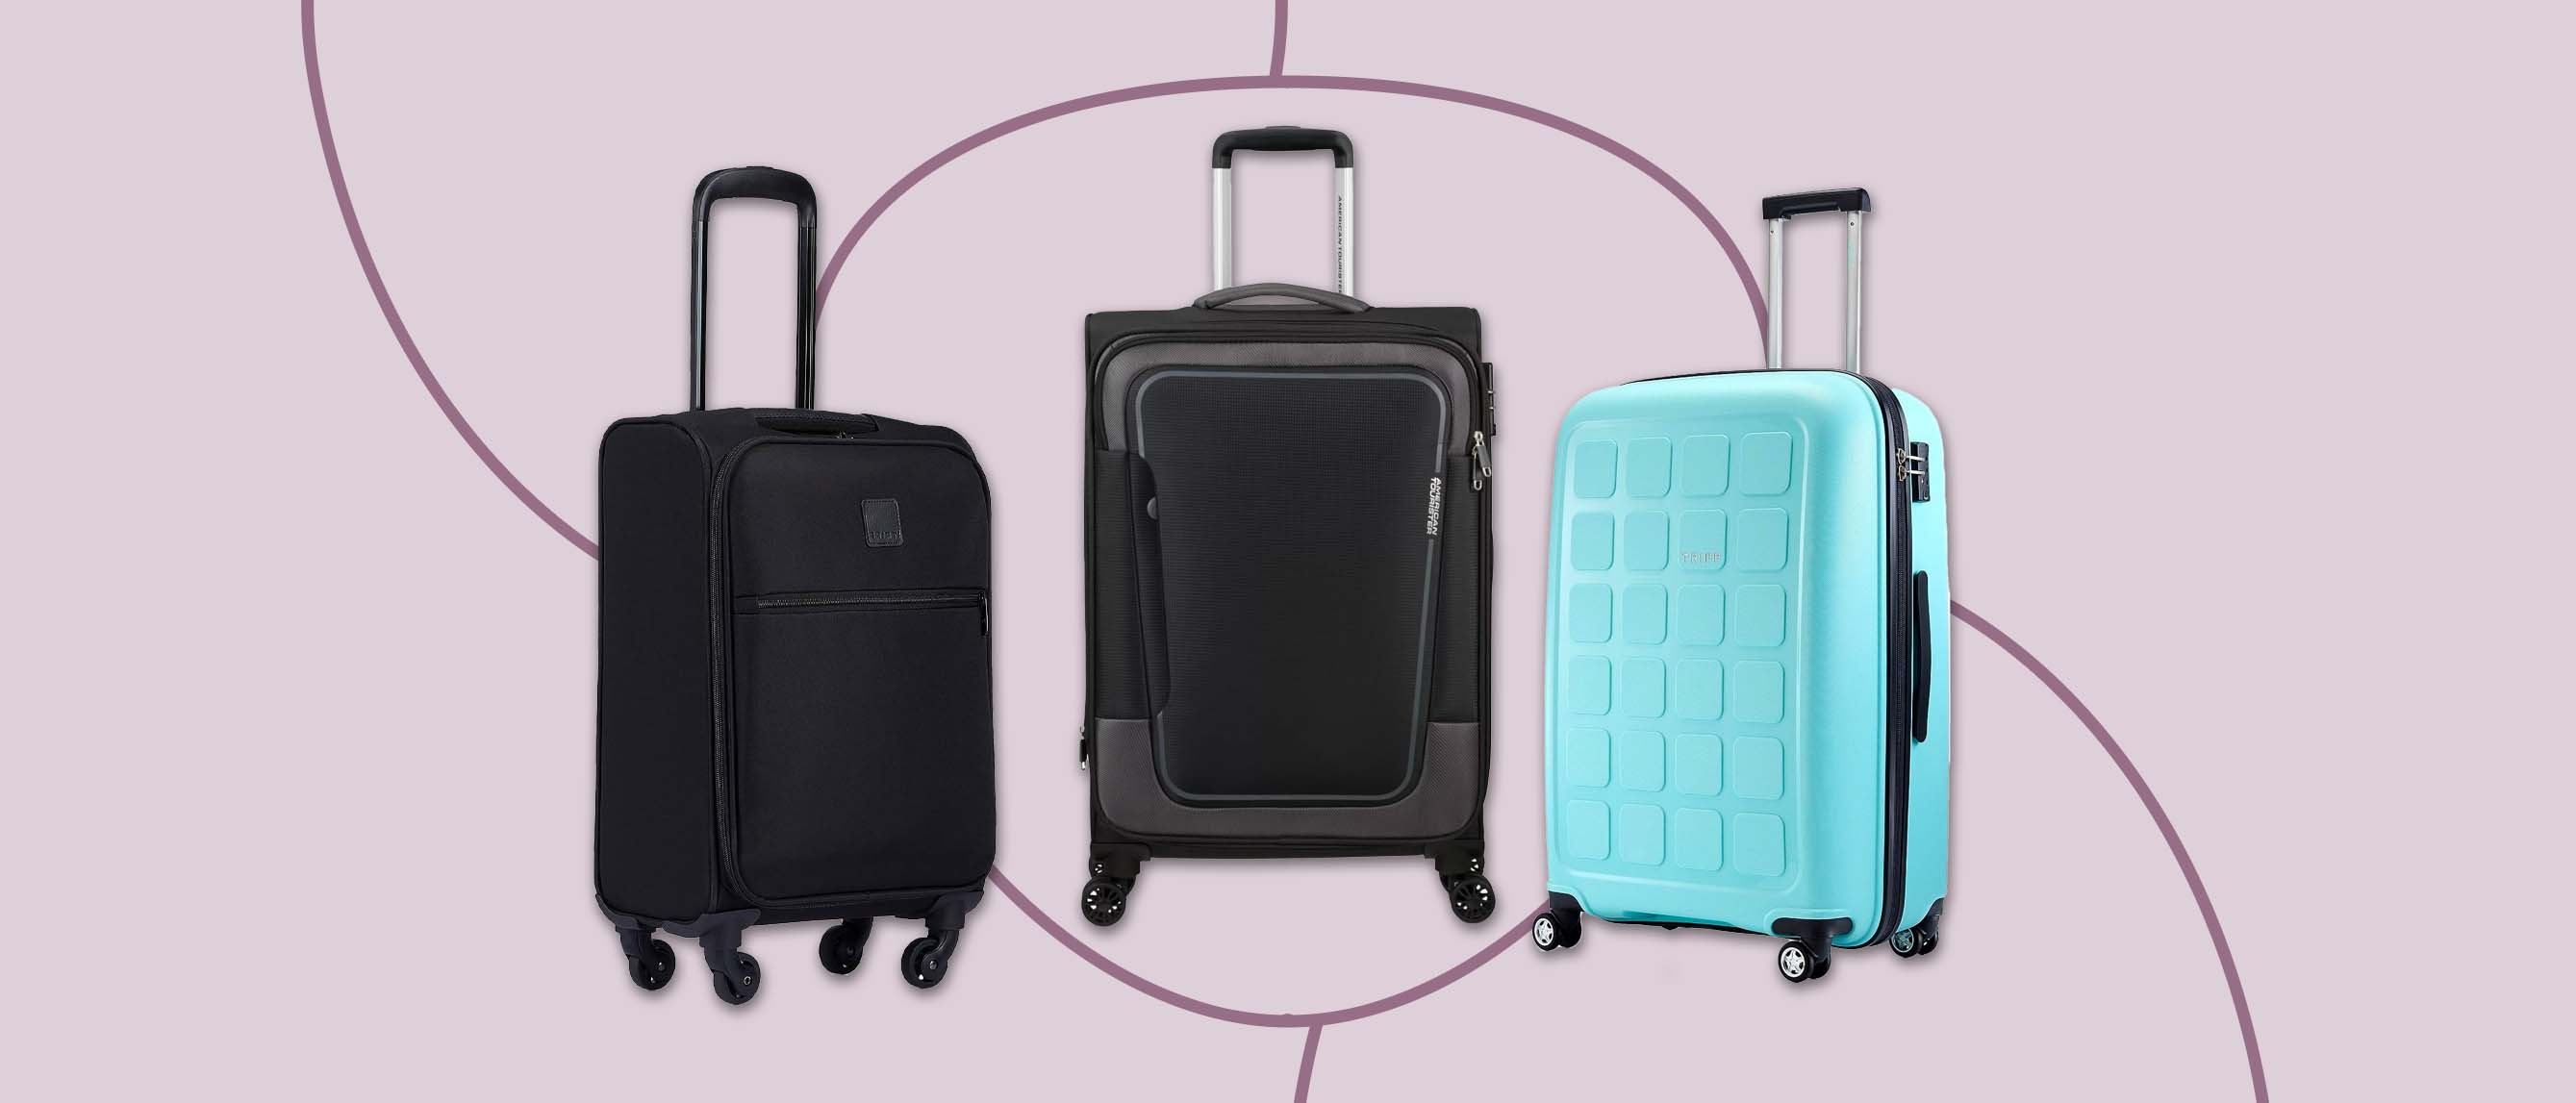 Suitcase 101: How to Choose the Right Travel Luggage